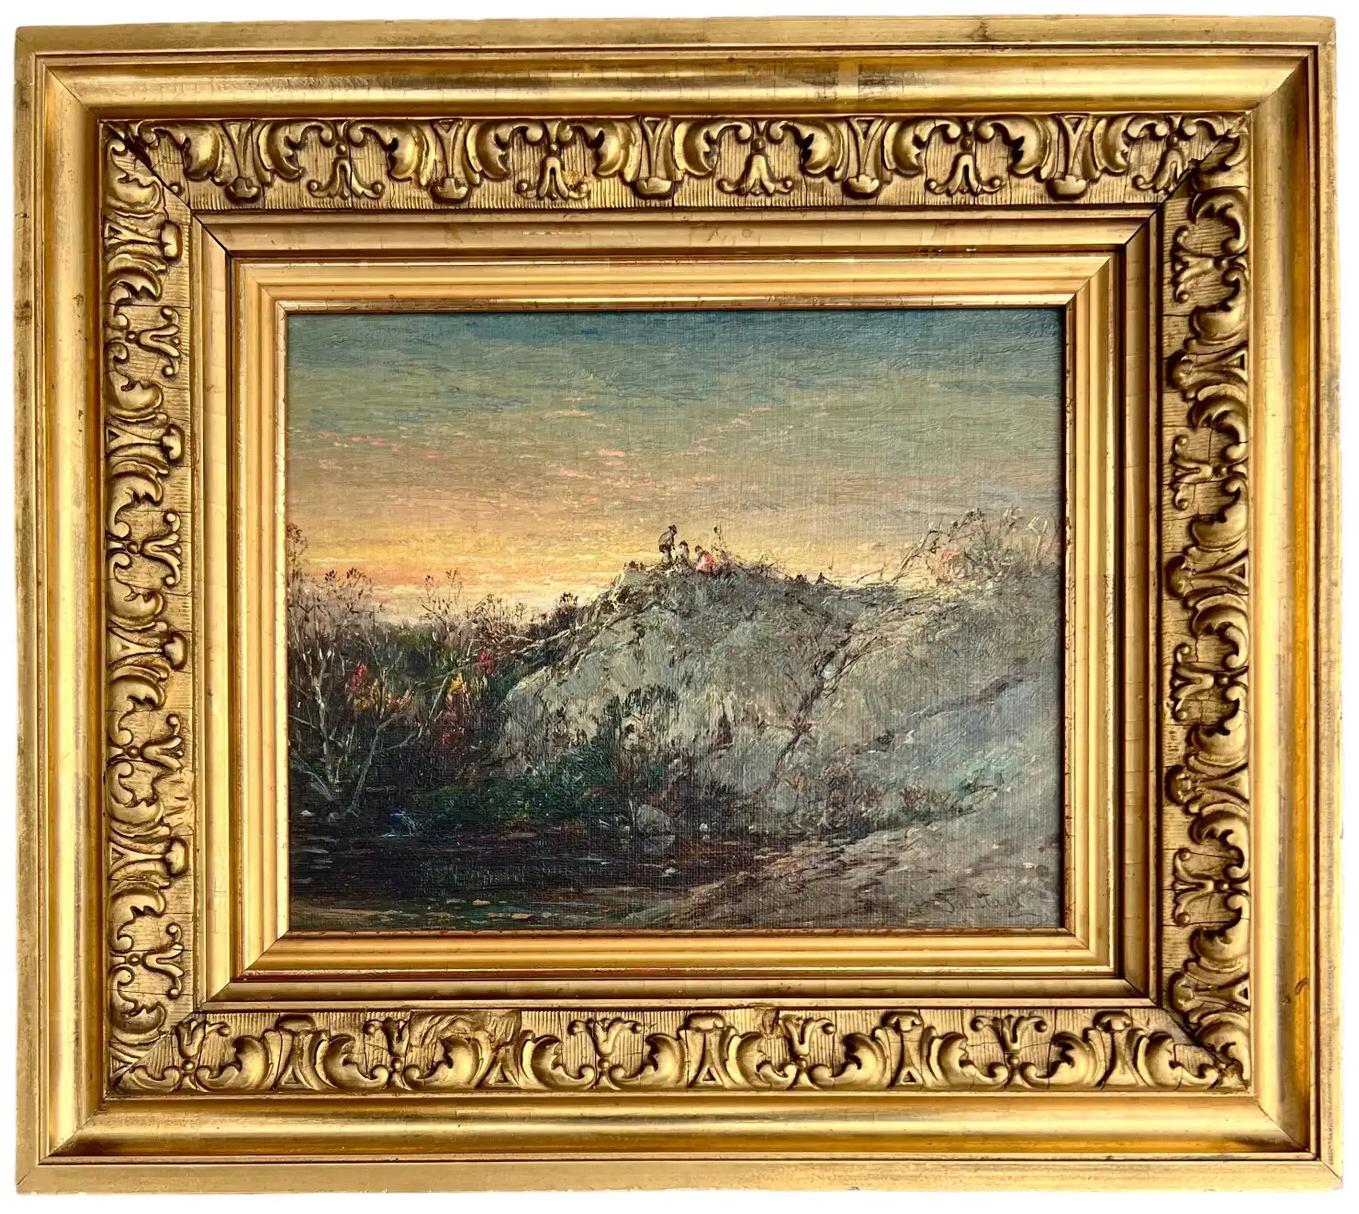 Twilight in the Hills - Hudson River School Painting by William Louis Sonntag Sr.